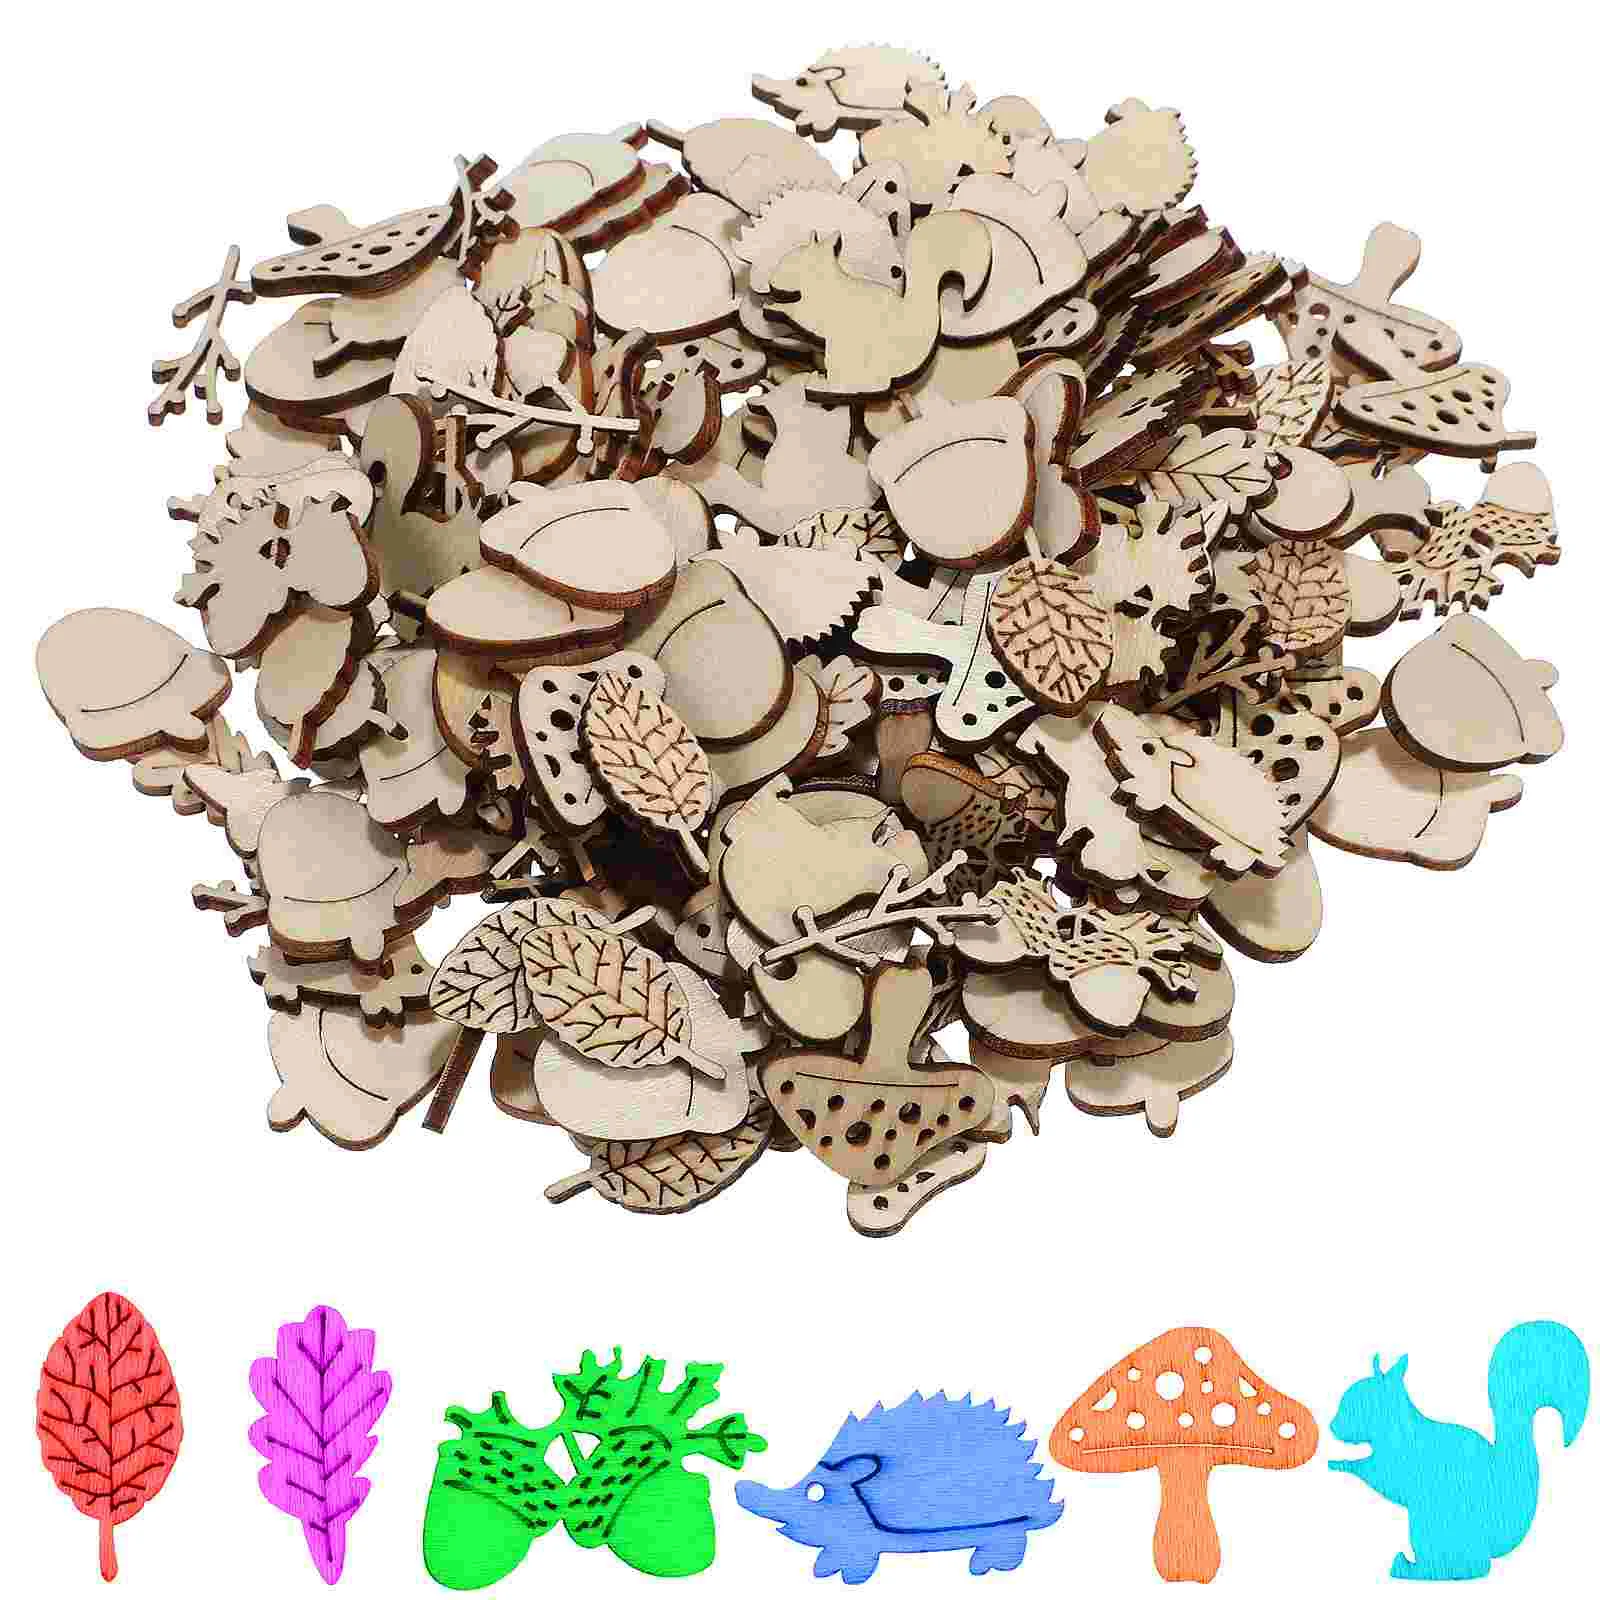 

200 Pcs Crafts Crafting Supplies Animal Blank Wood Chips Wooden Shapes For Slices Graffiti Unfinished